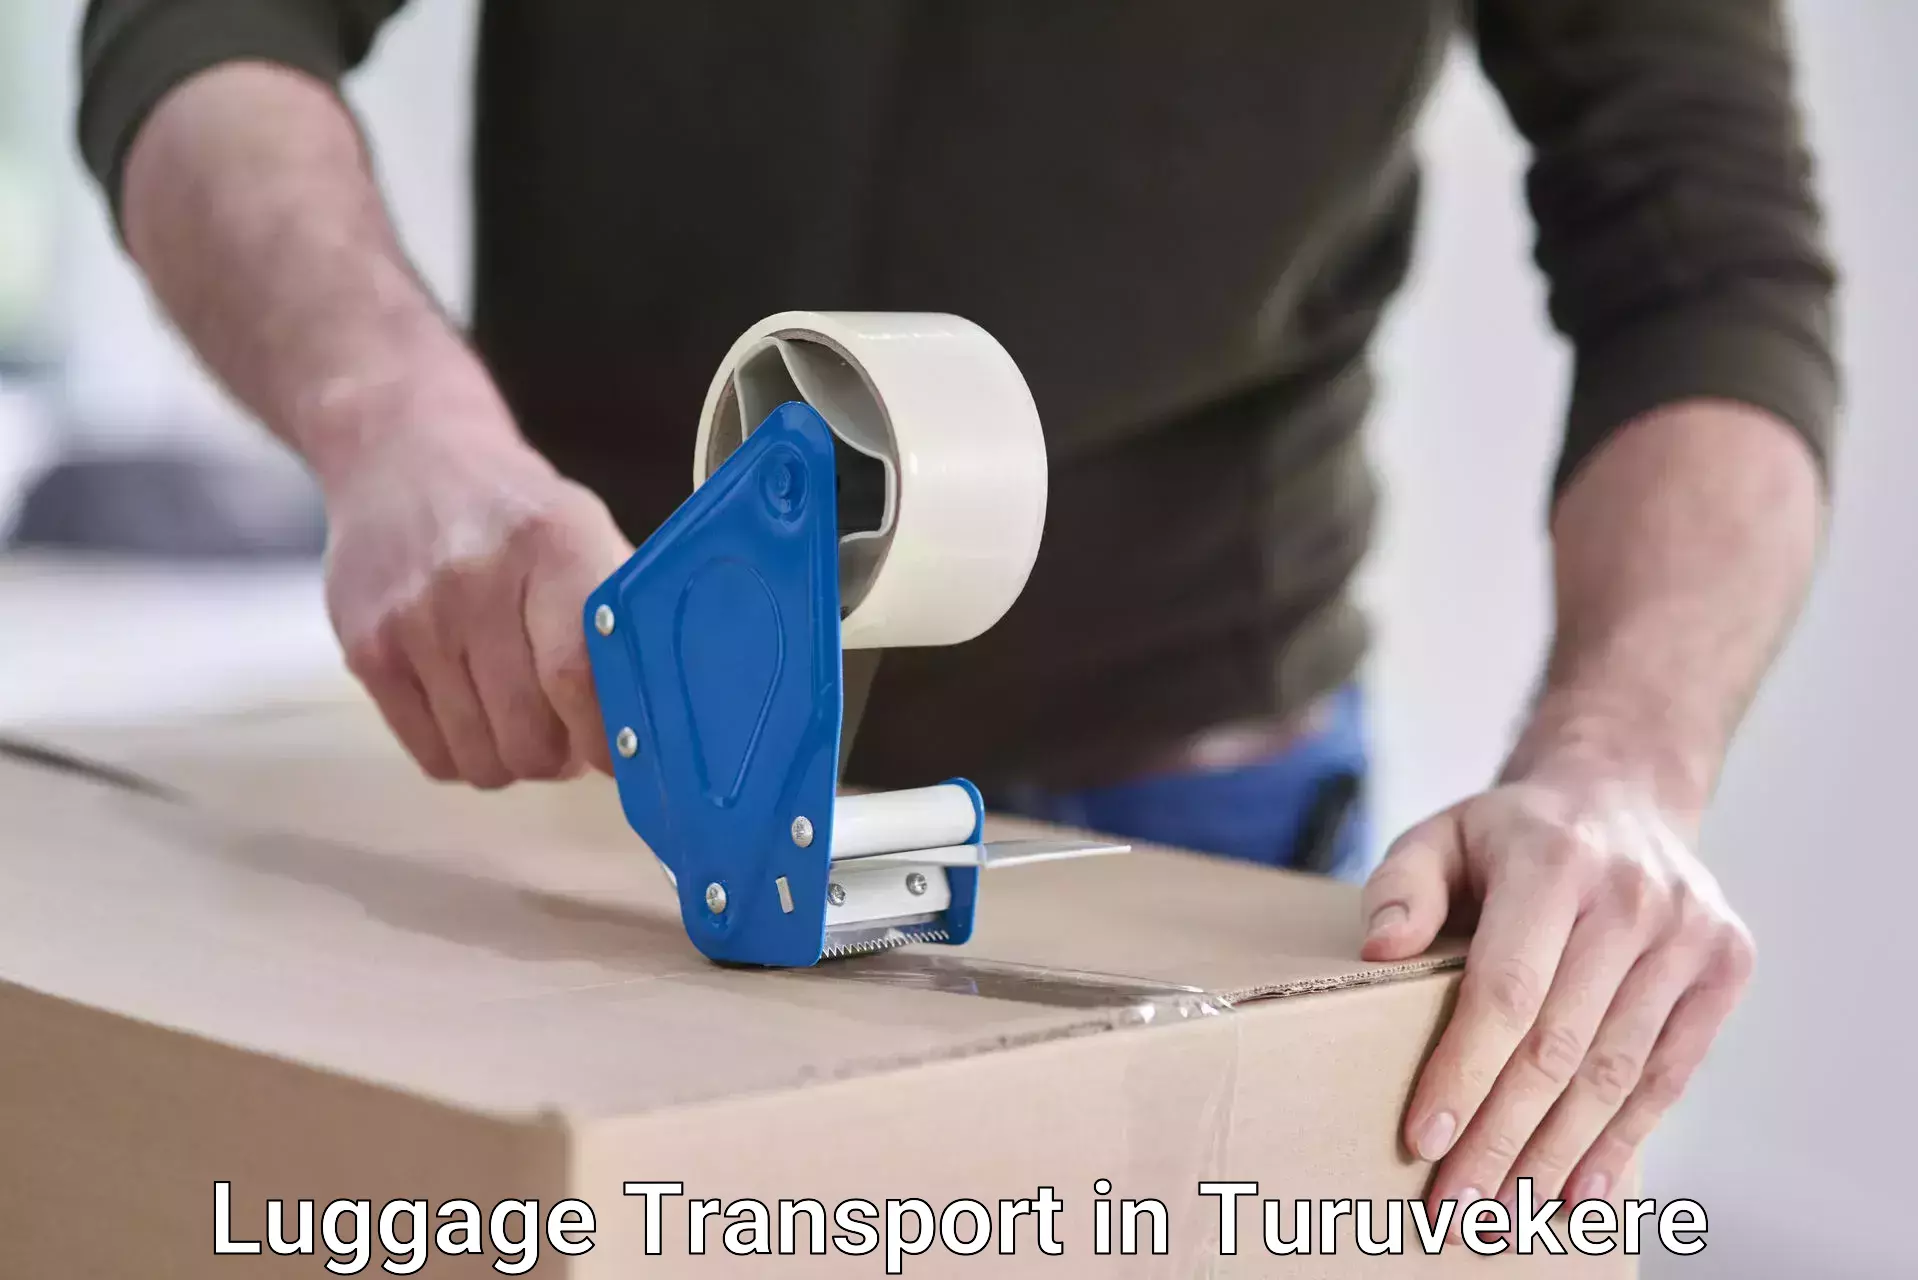 Baggage transport network in Turuvekere